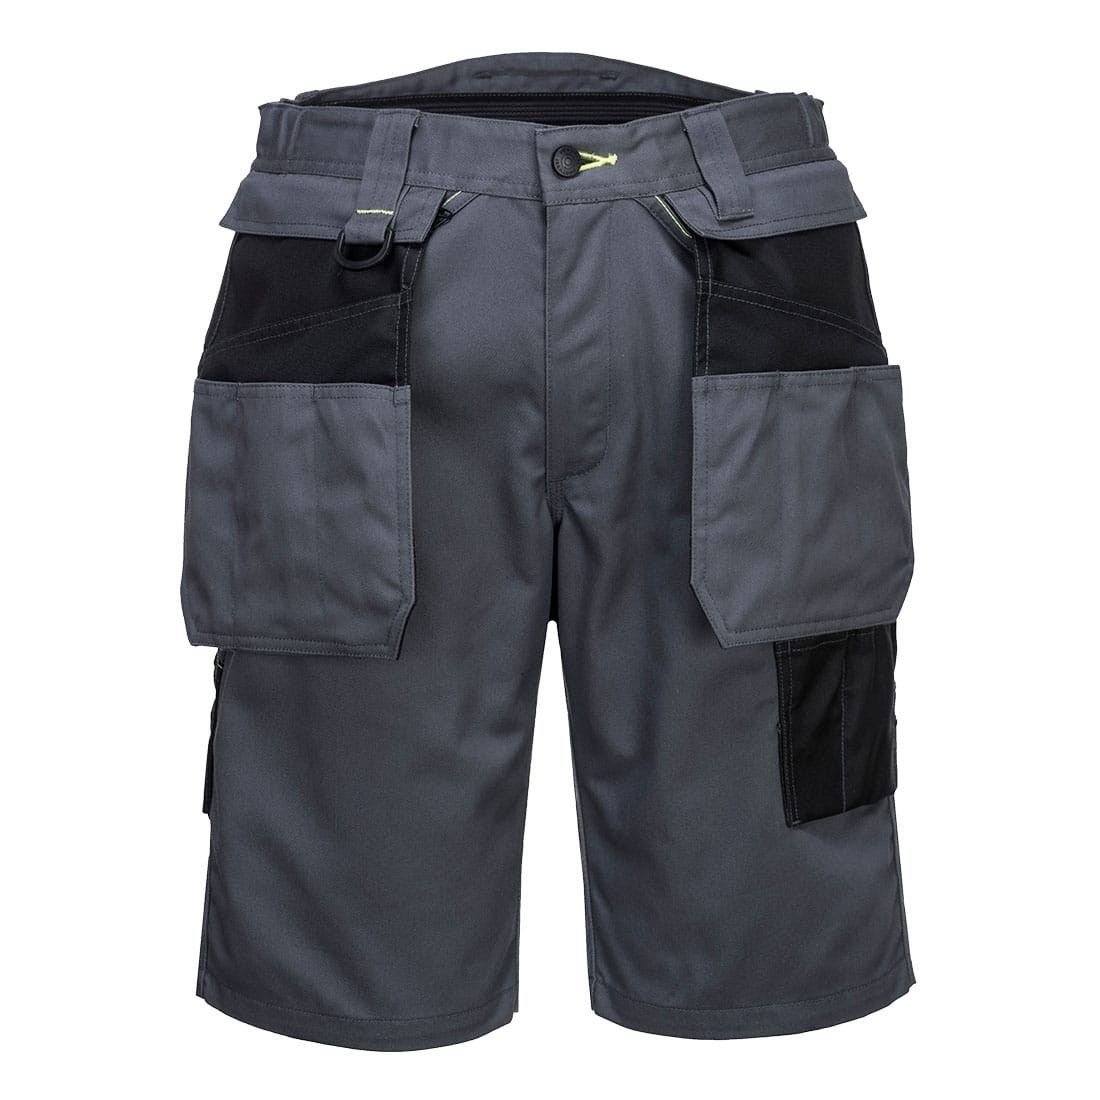 Portwest PW3 Holster Work Shorts